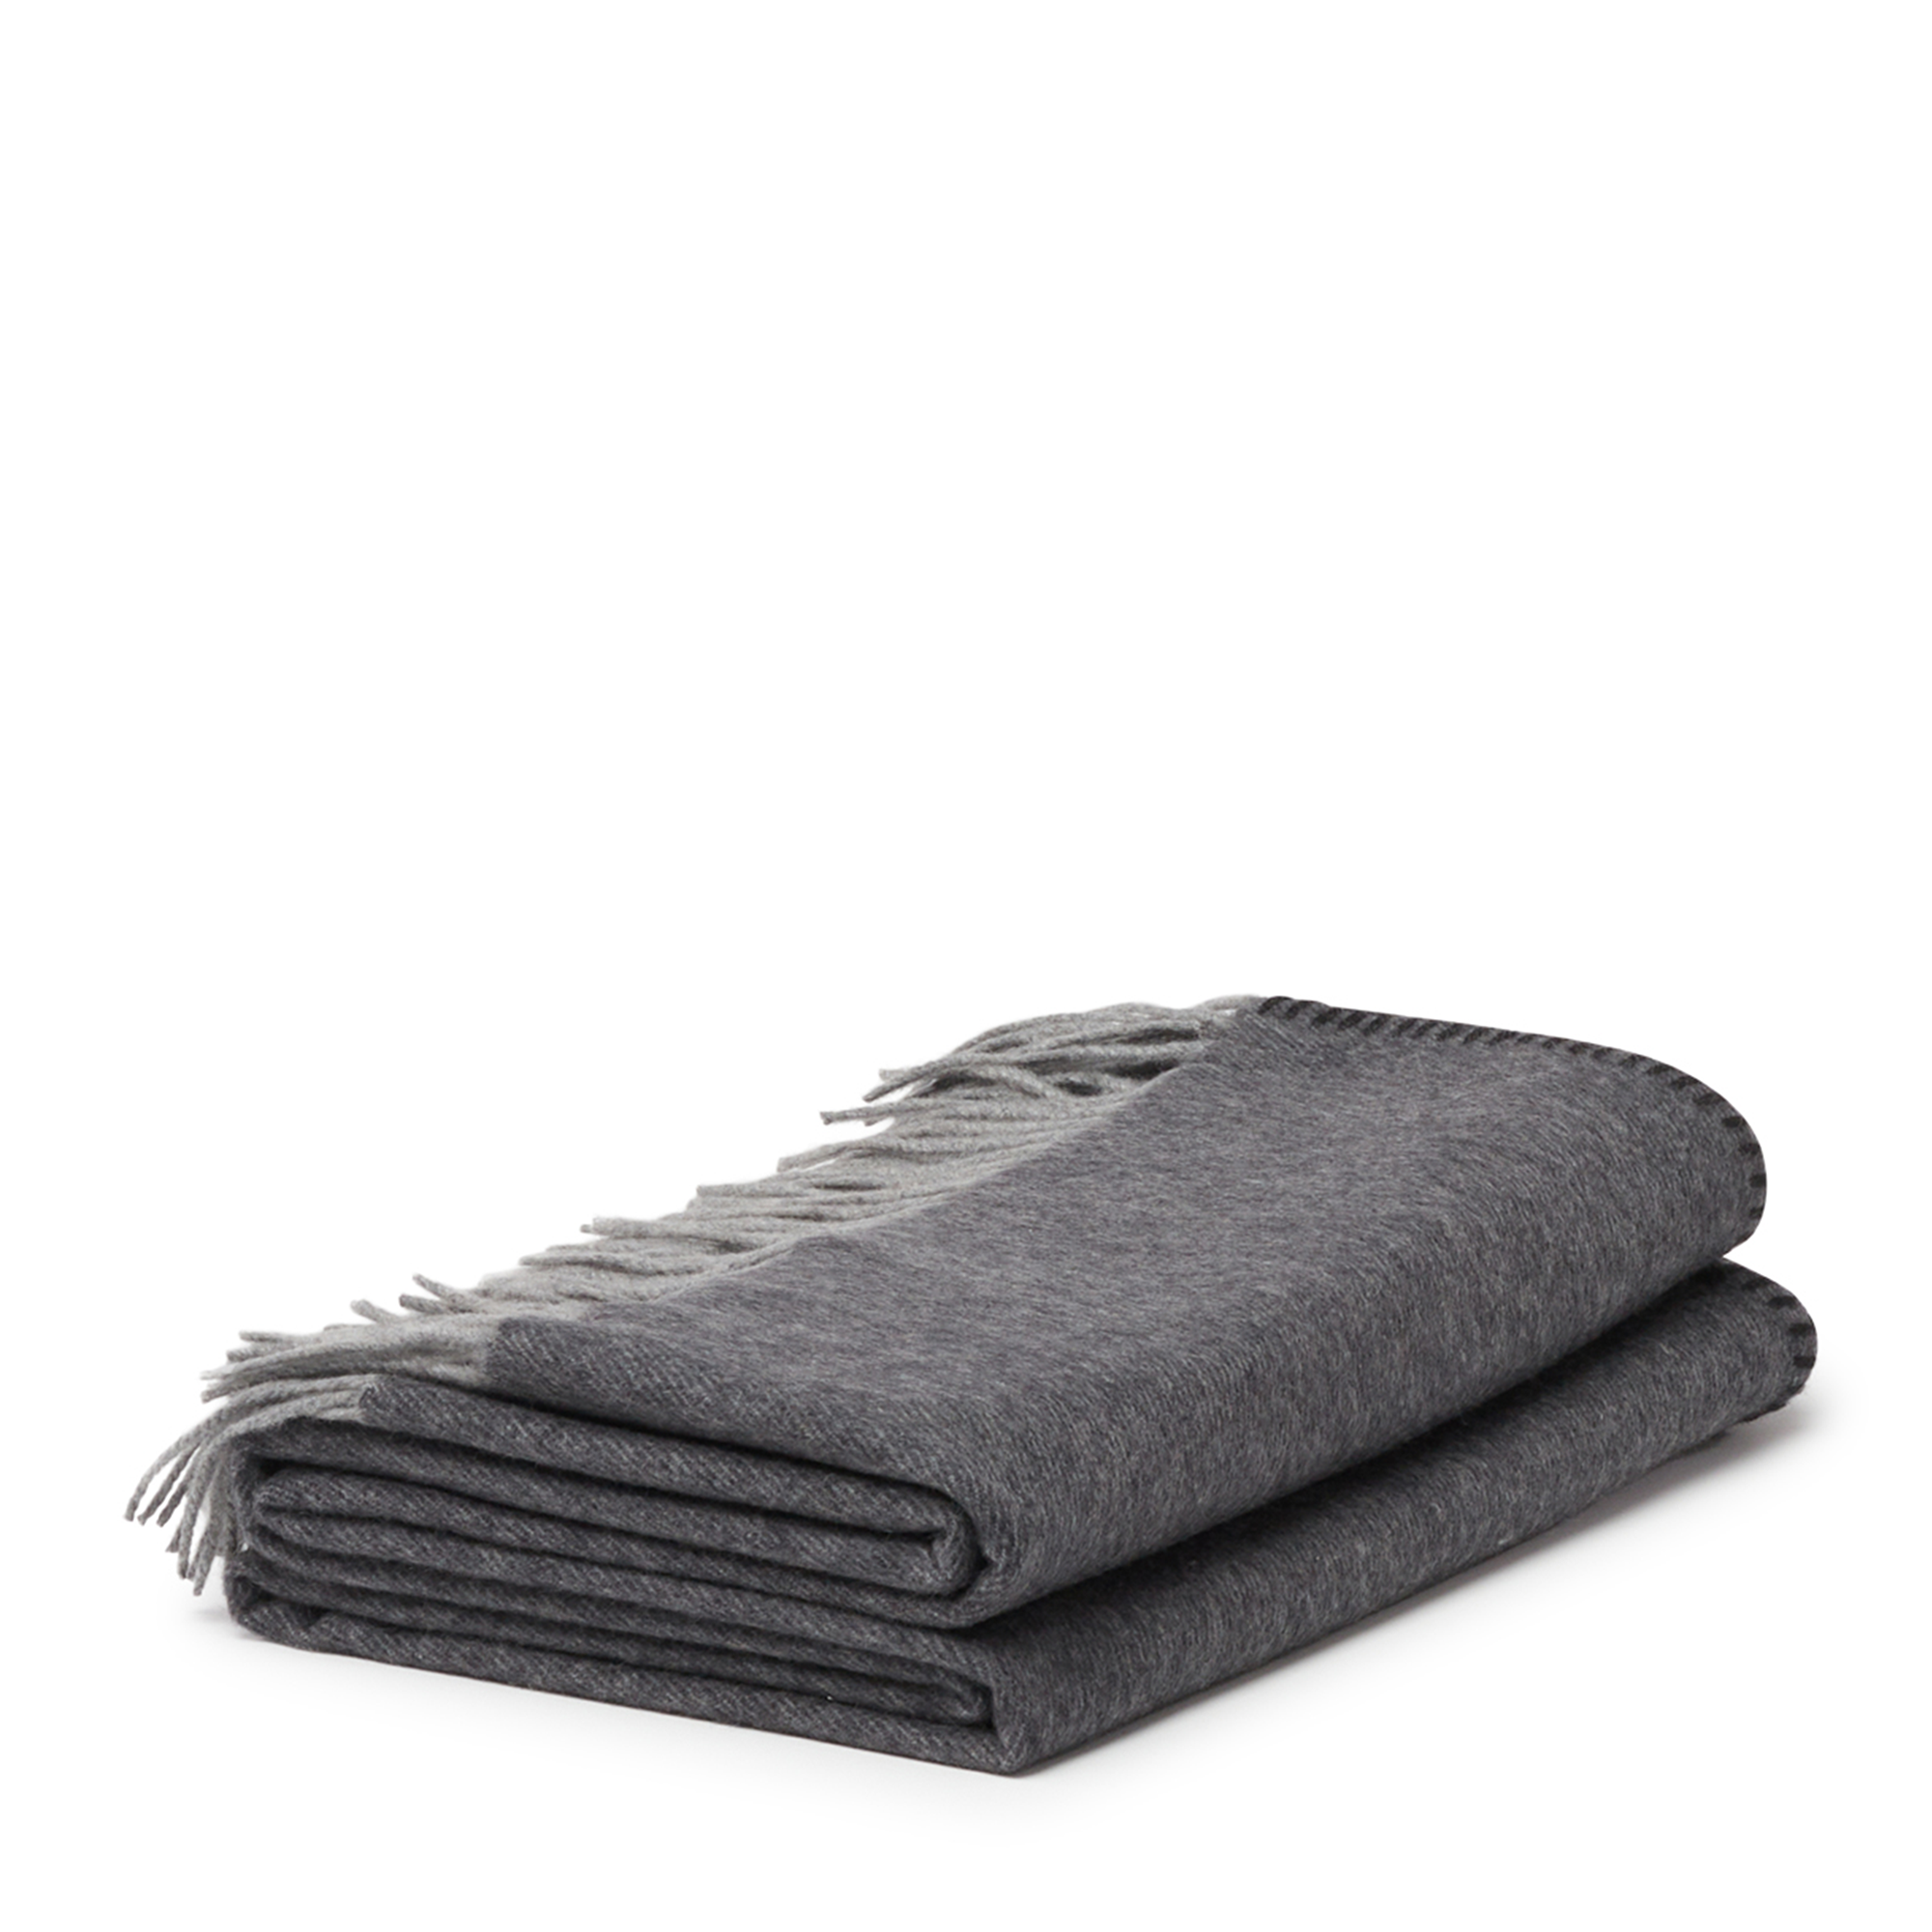 Melrose Two-Tone Throw in Steel and Grey, featuring a double-sided design with an elegant whip-stitched edge. Crafted from 100% cashmere fibers and adorned with delicate hand-crafted fringes, this luxurious throw complements any style and is perfect for every season.